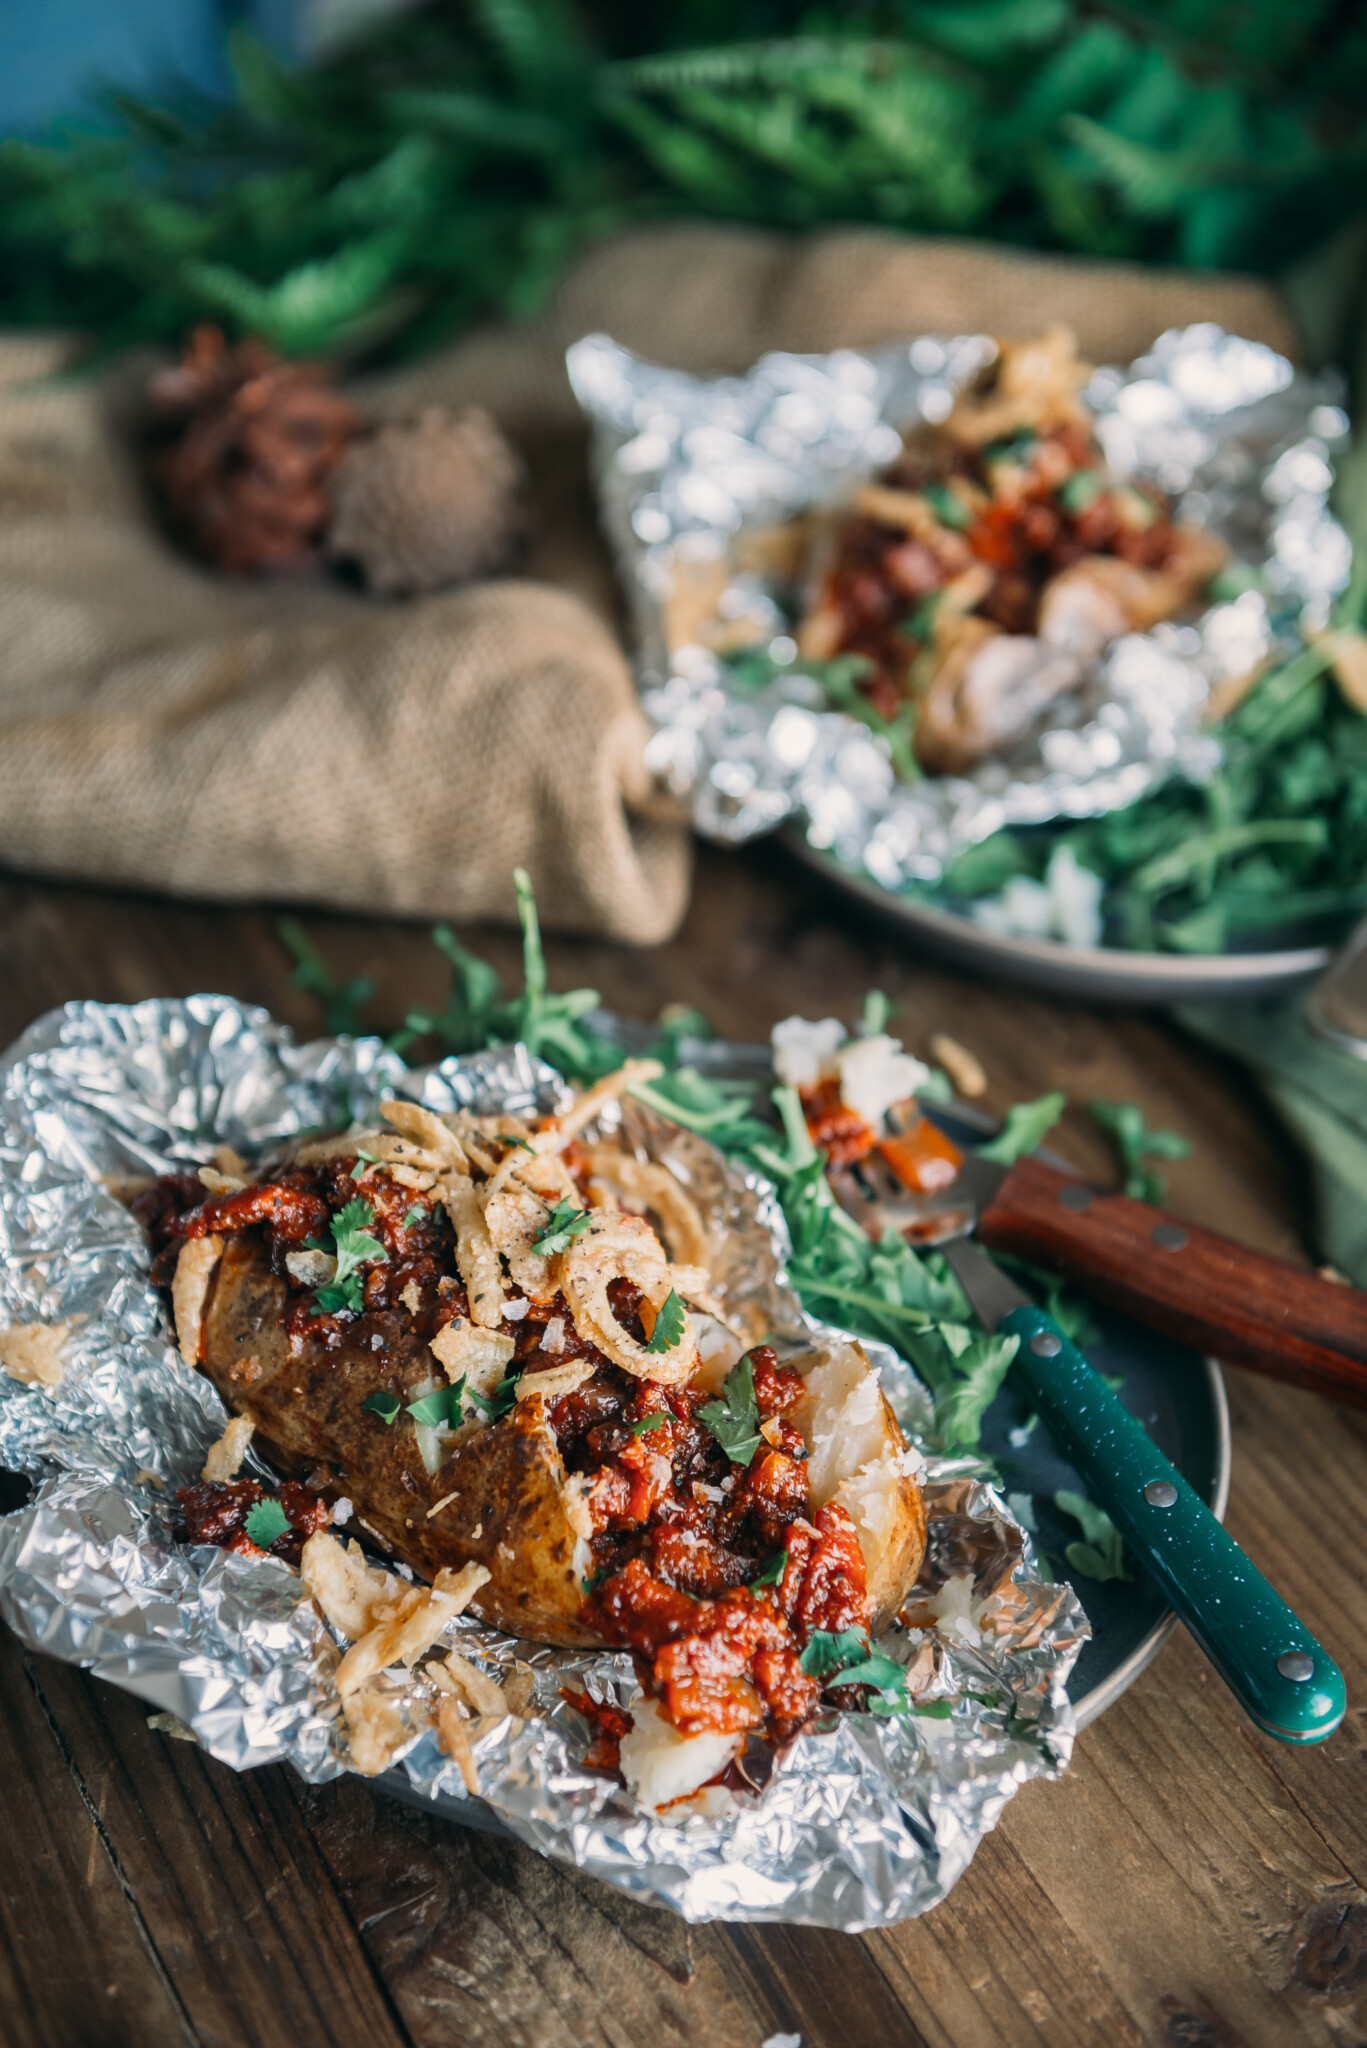 Baked potato opened in foil and topped with sloppy joe mix, crispy onions and garnished with minced parsley. 